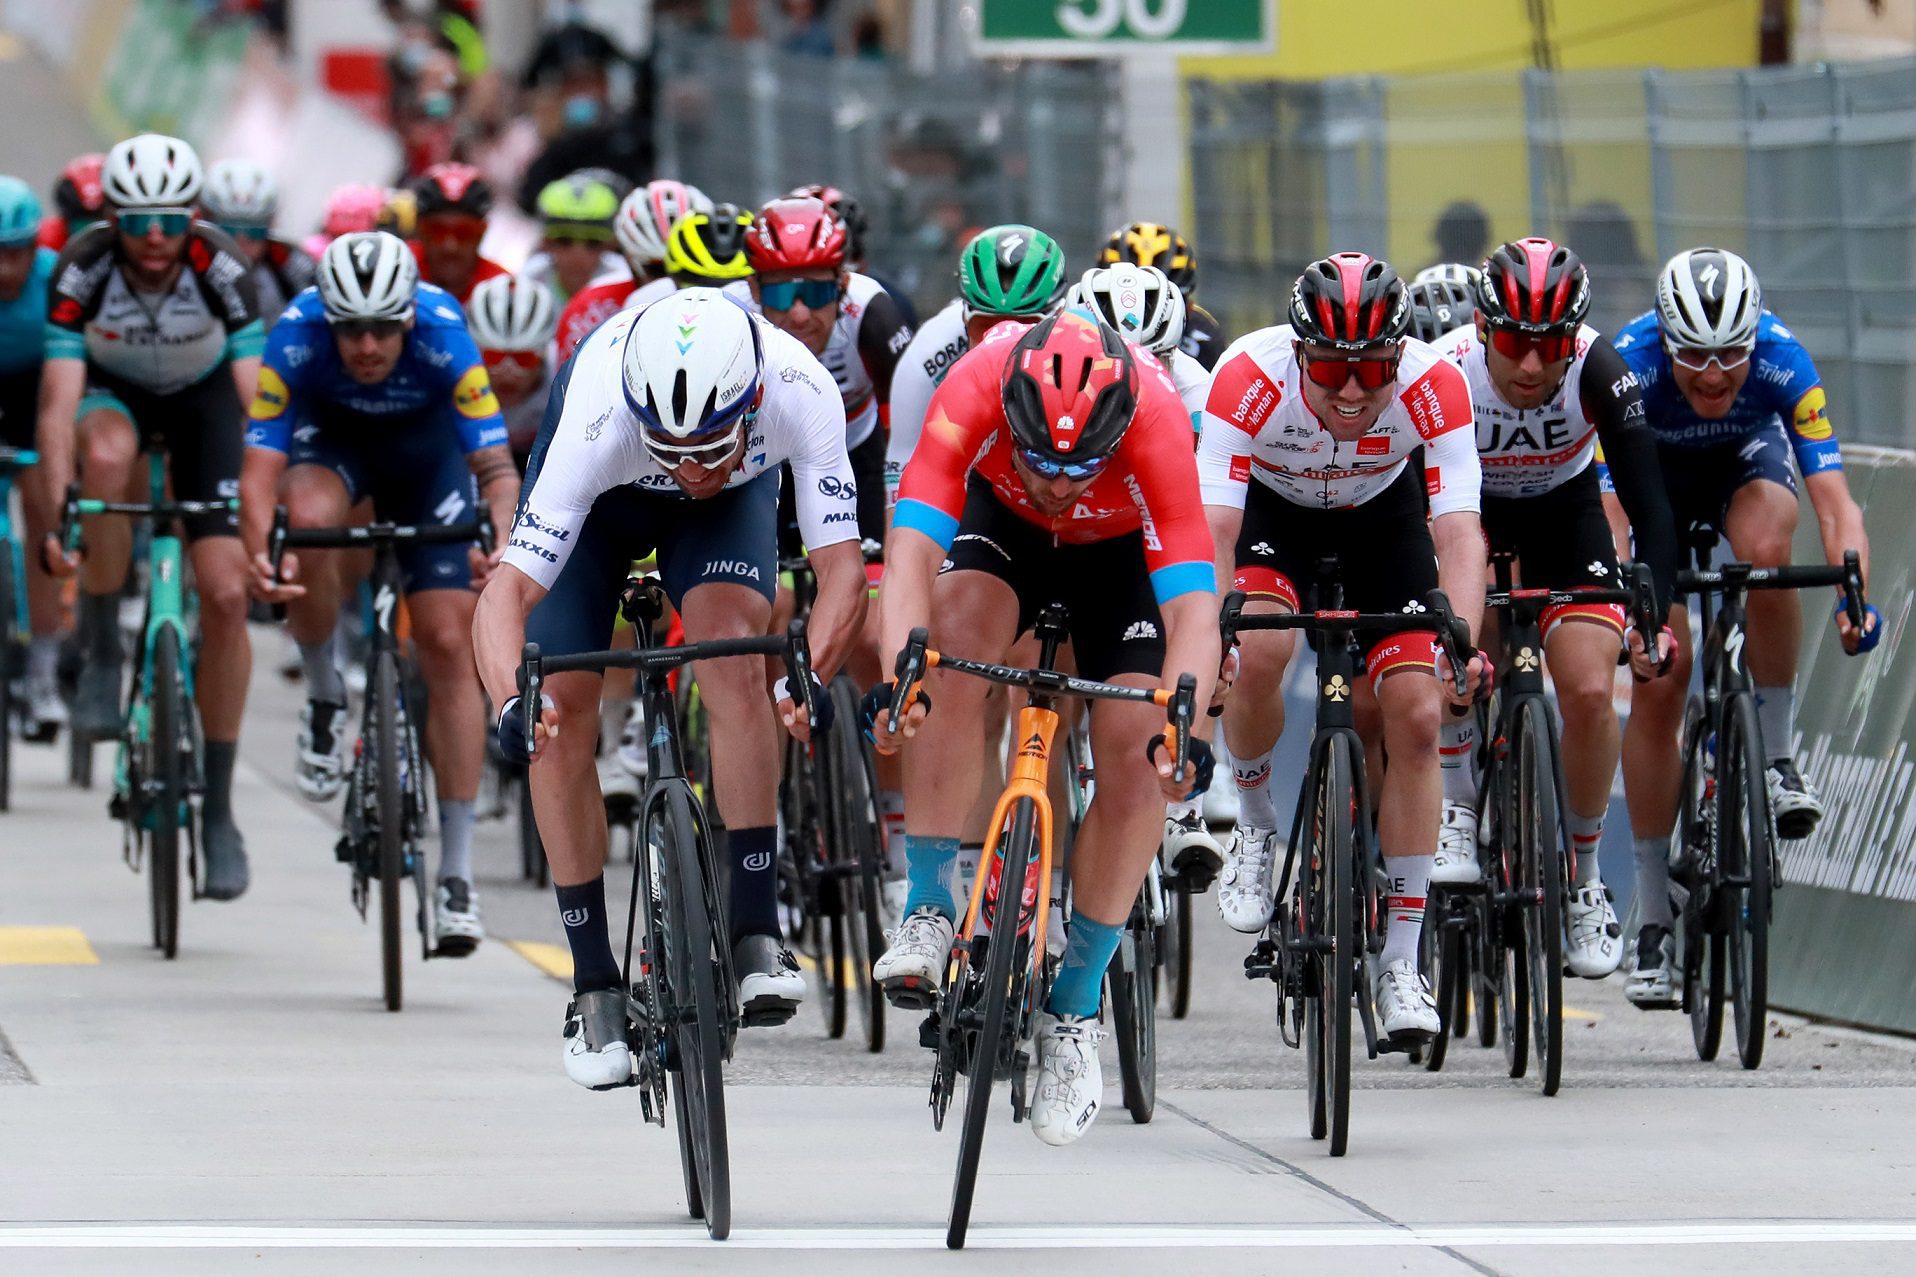 Bevin takes second place on stage 2 of Tour de Romandie